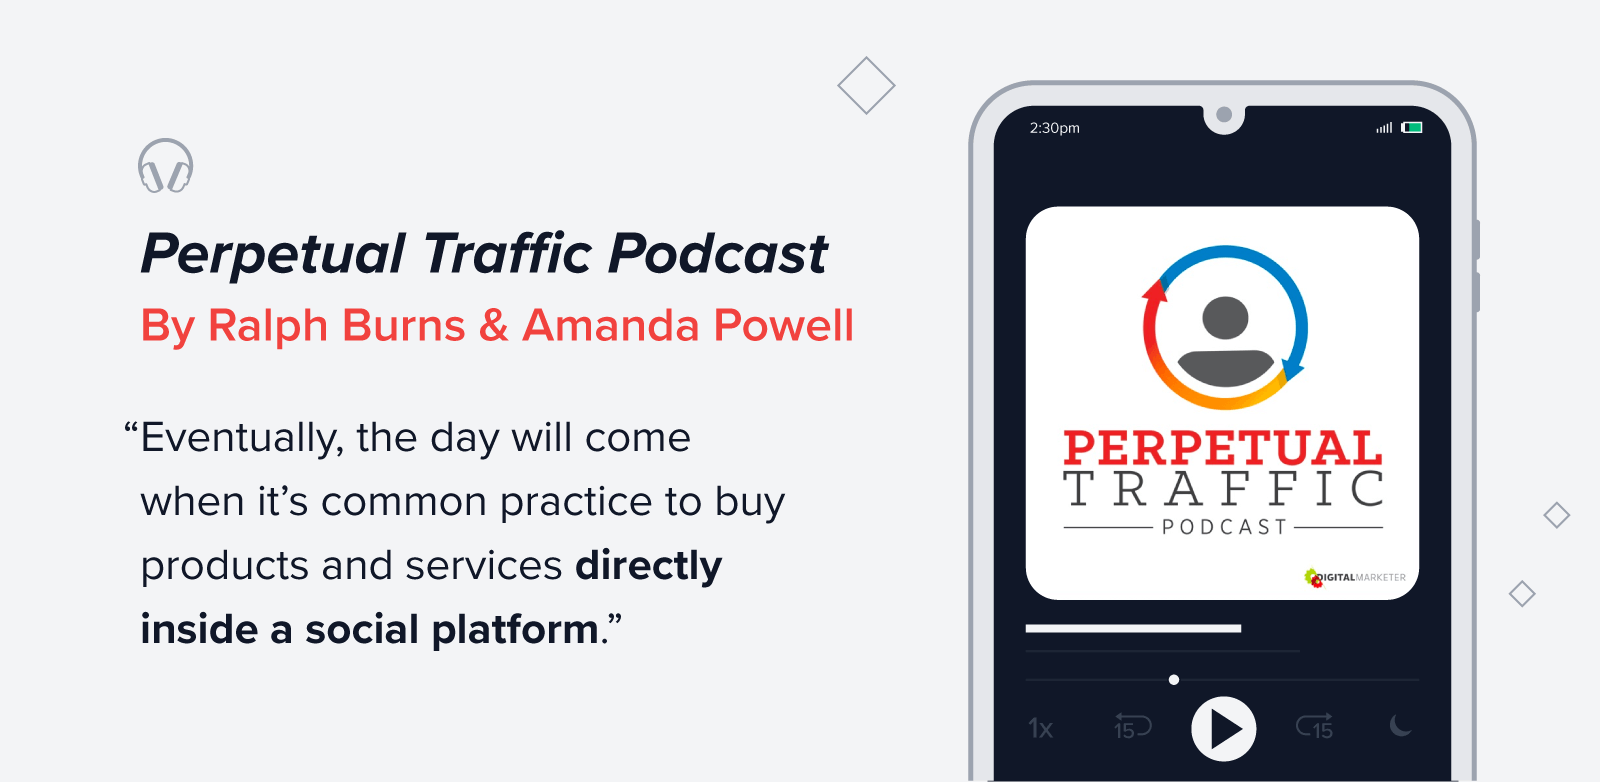 Perpetual traffic podcast quote